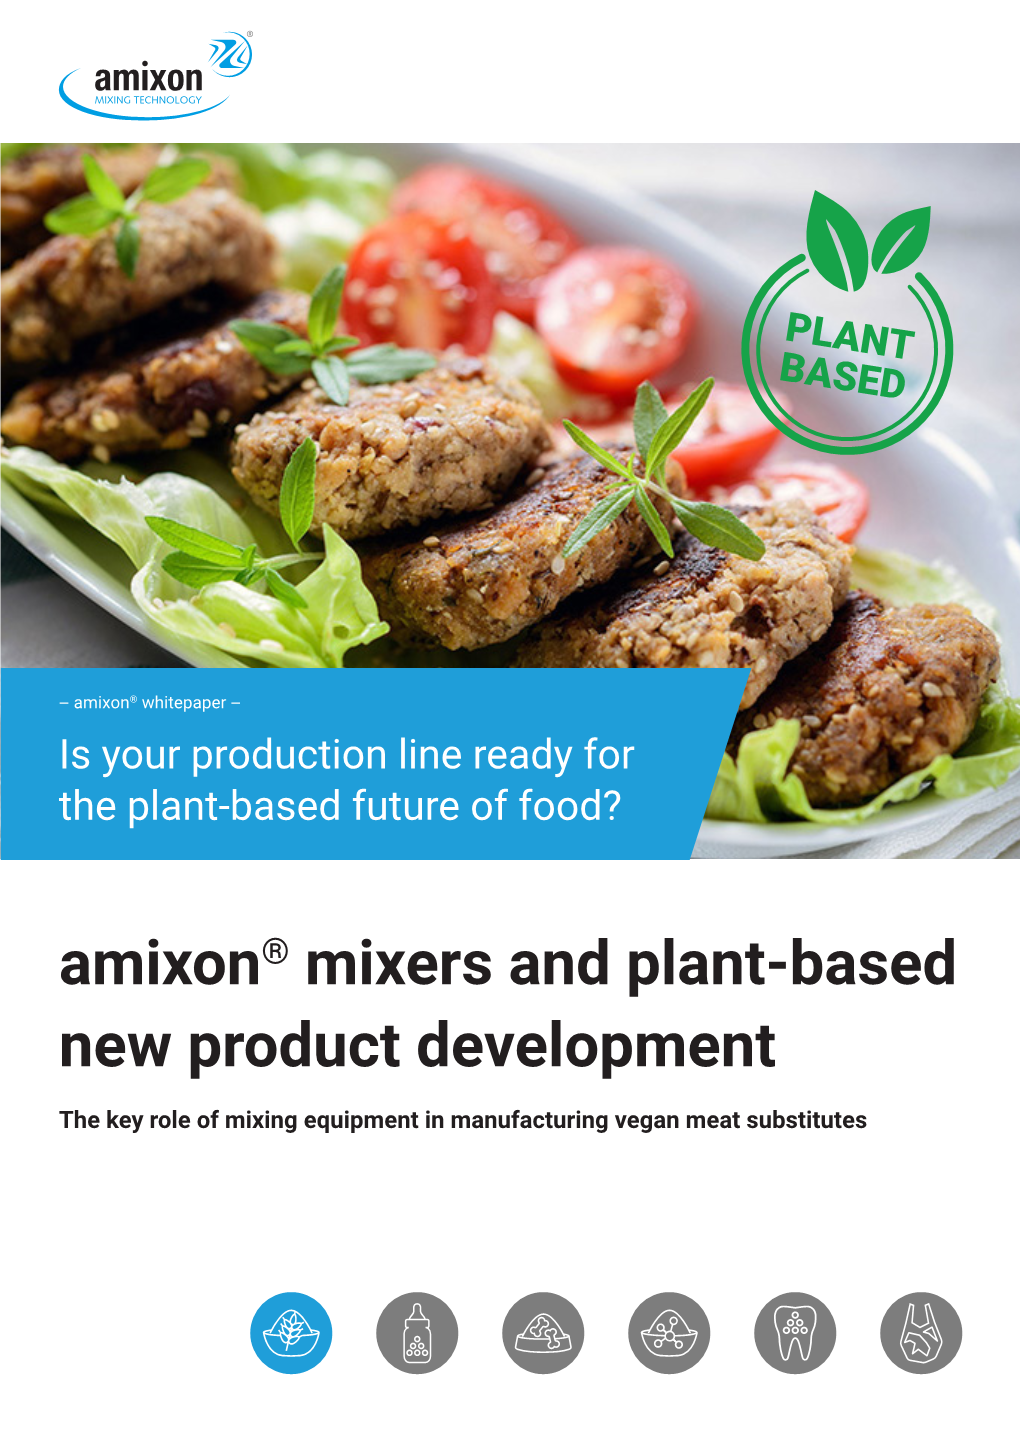 Download Amixon ® Whitepaper "Plant-Based Manufacturing & New